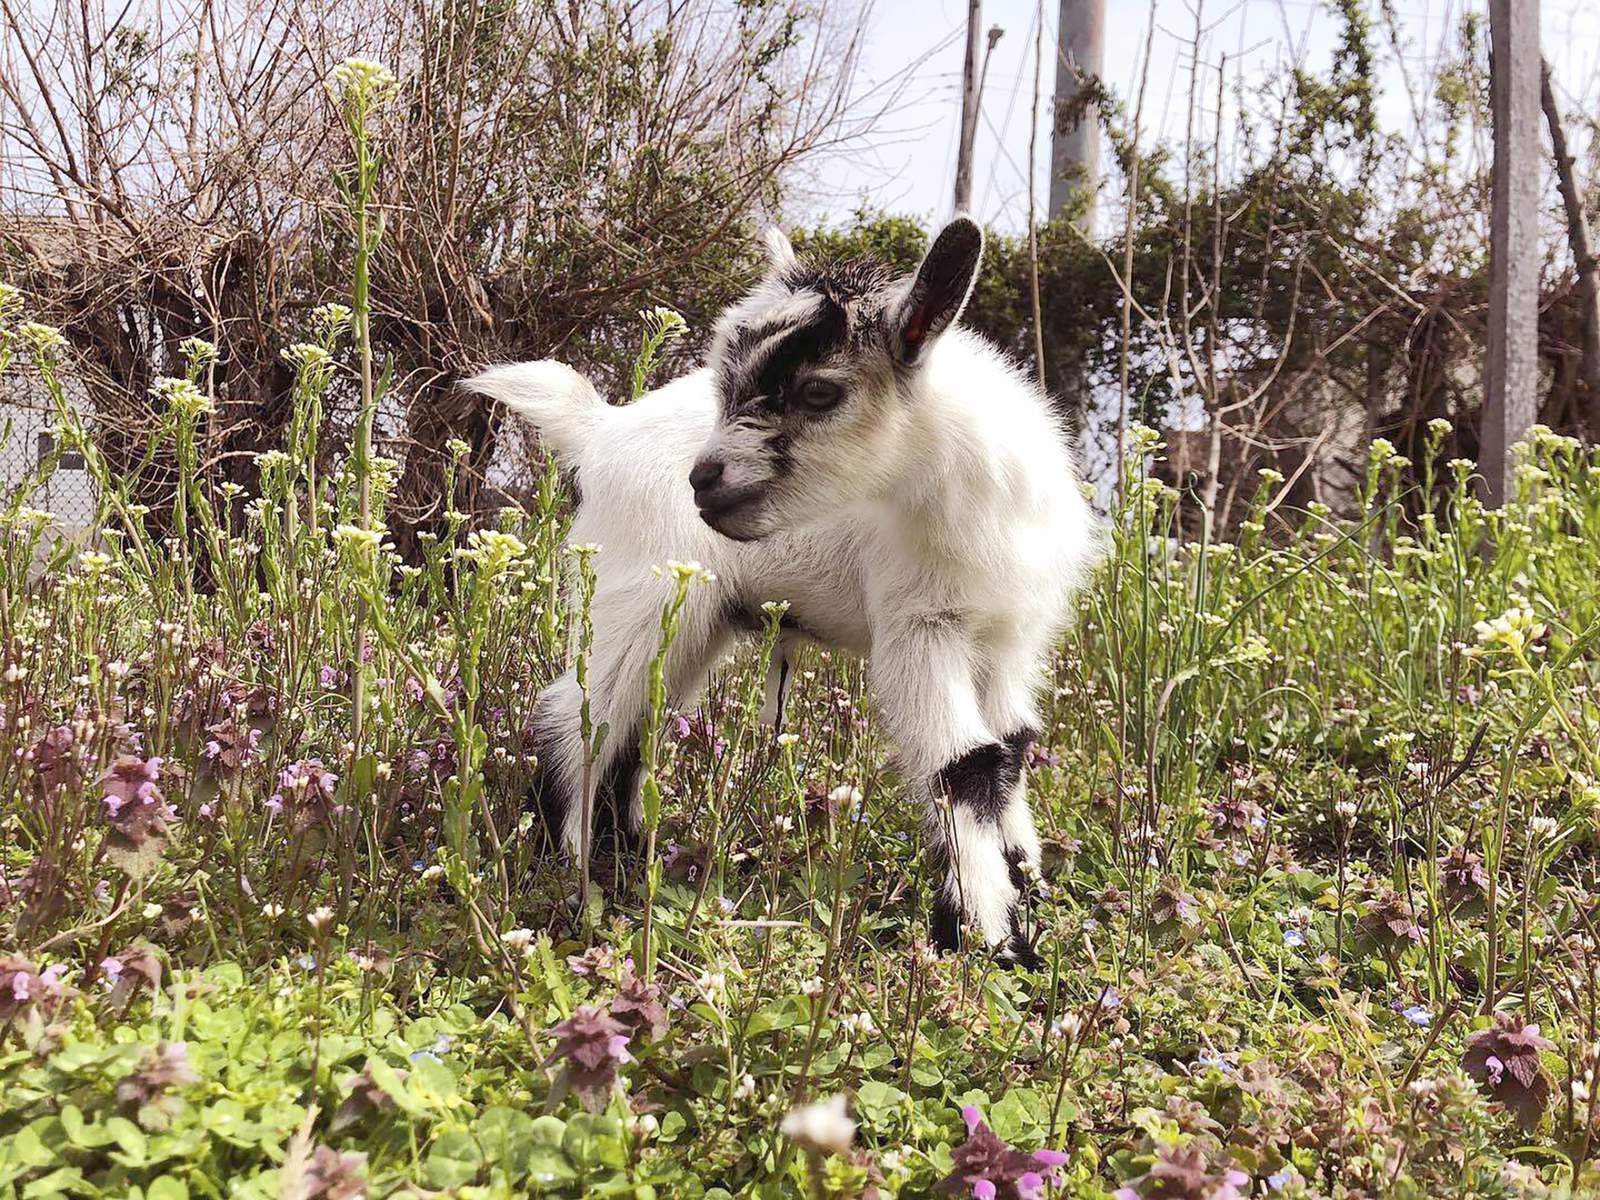 Not kidding around: Florida woman sues for paternity test on goats